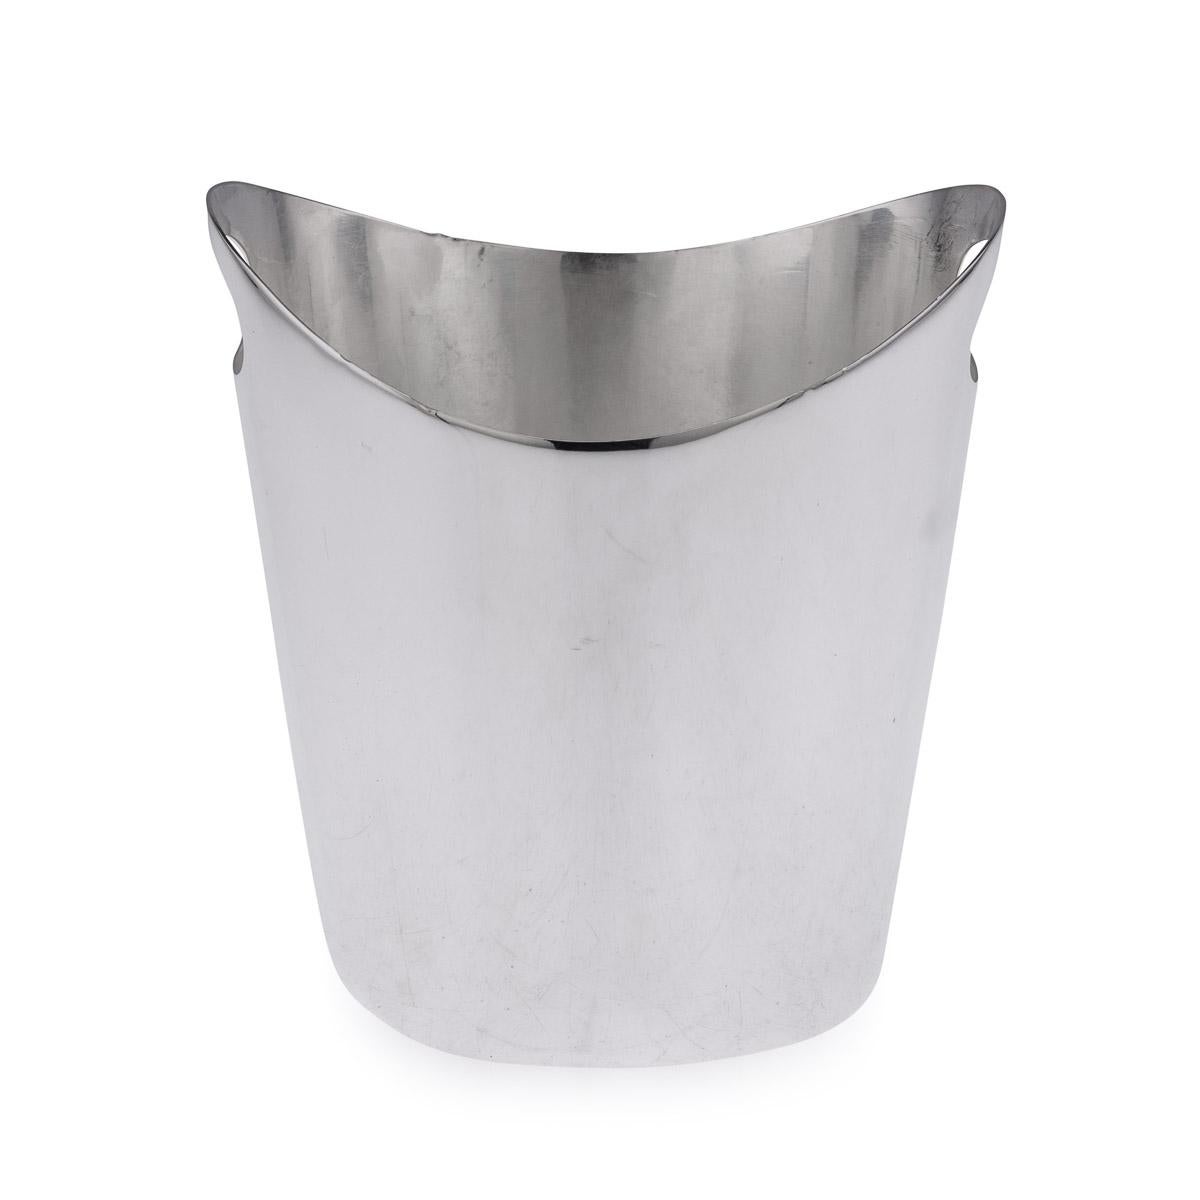 A rare and elegant ice bucket made by Walker and Hall of Sheffield, England, around the 1930s. This ice bucket is of exceptionally high quality, having good weight in the hand and more importantly showing a sleek design that looks as relevant today